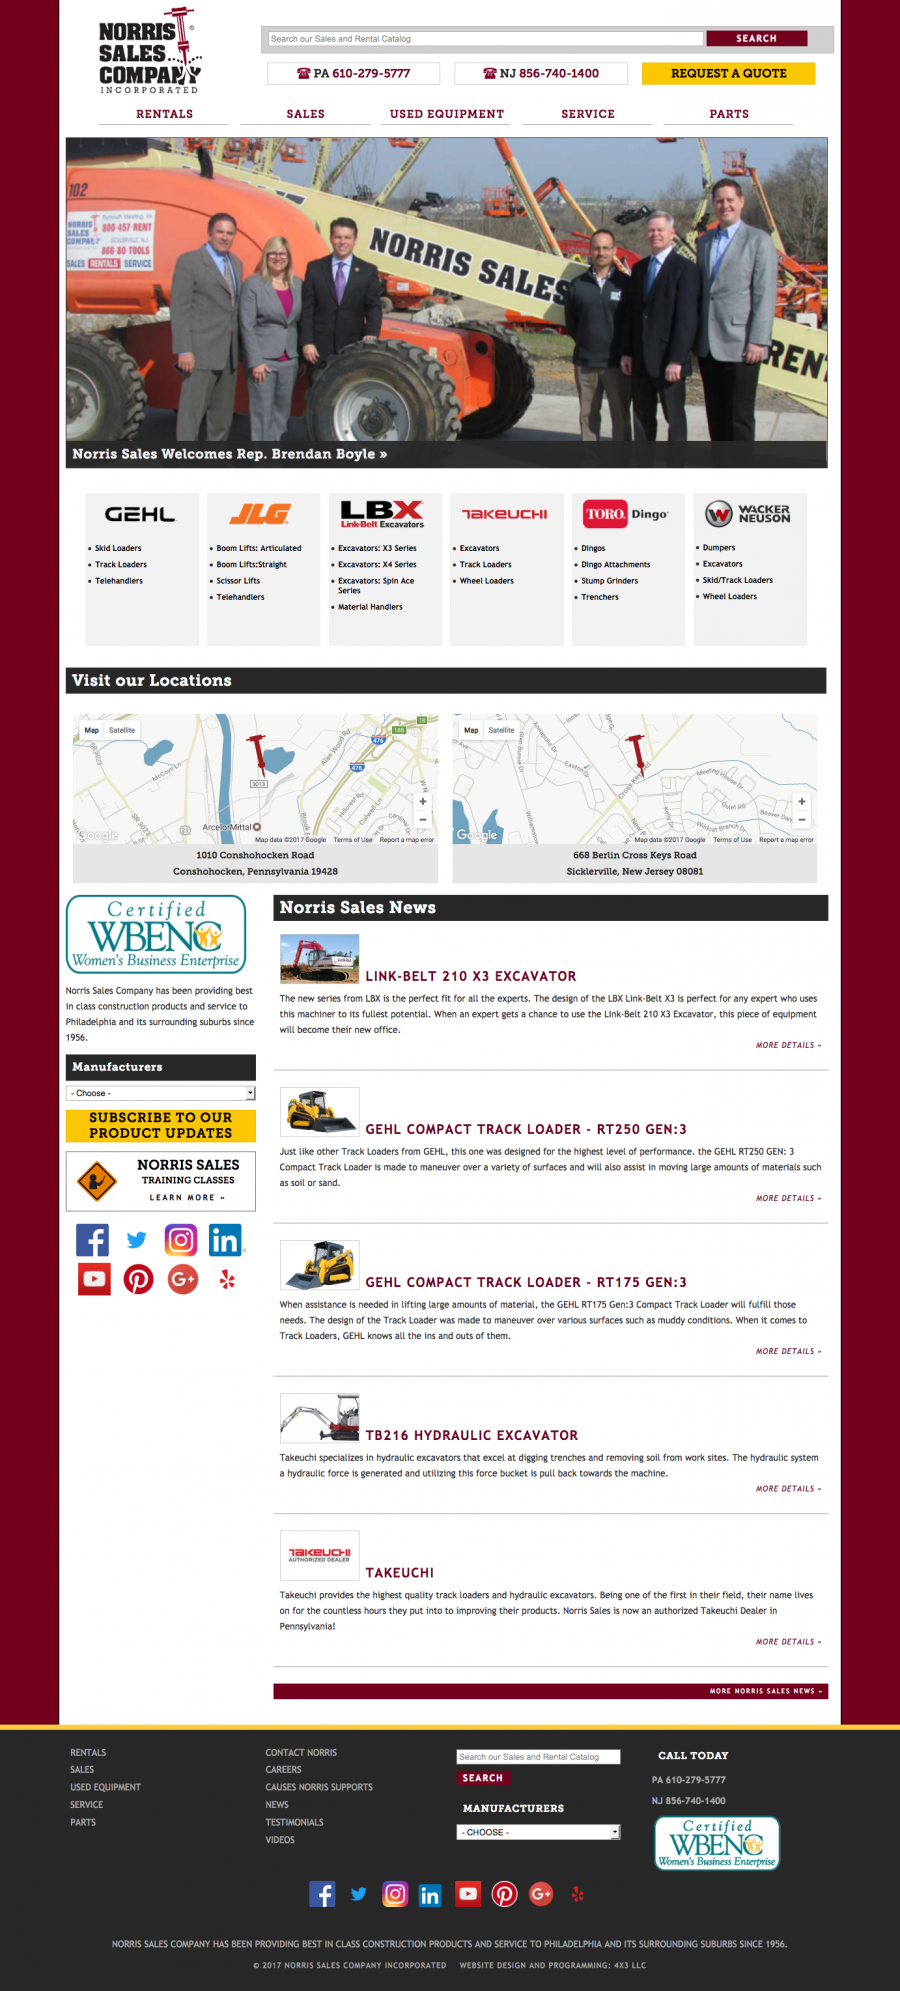 Norris Sales, Homepage featuring News, Maps, Manufacturers